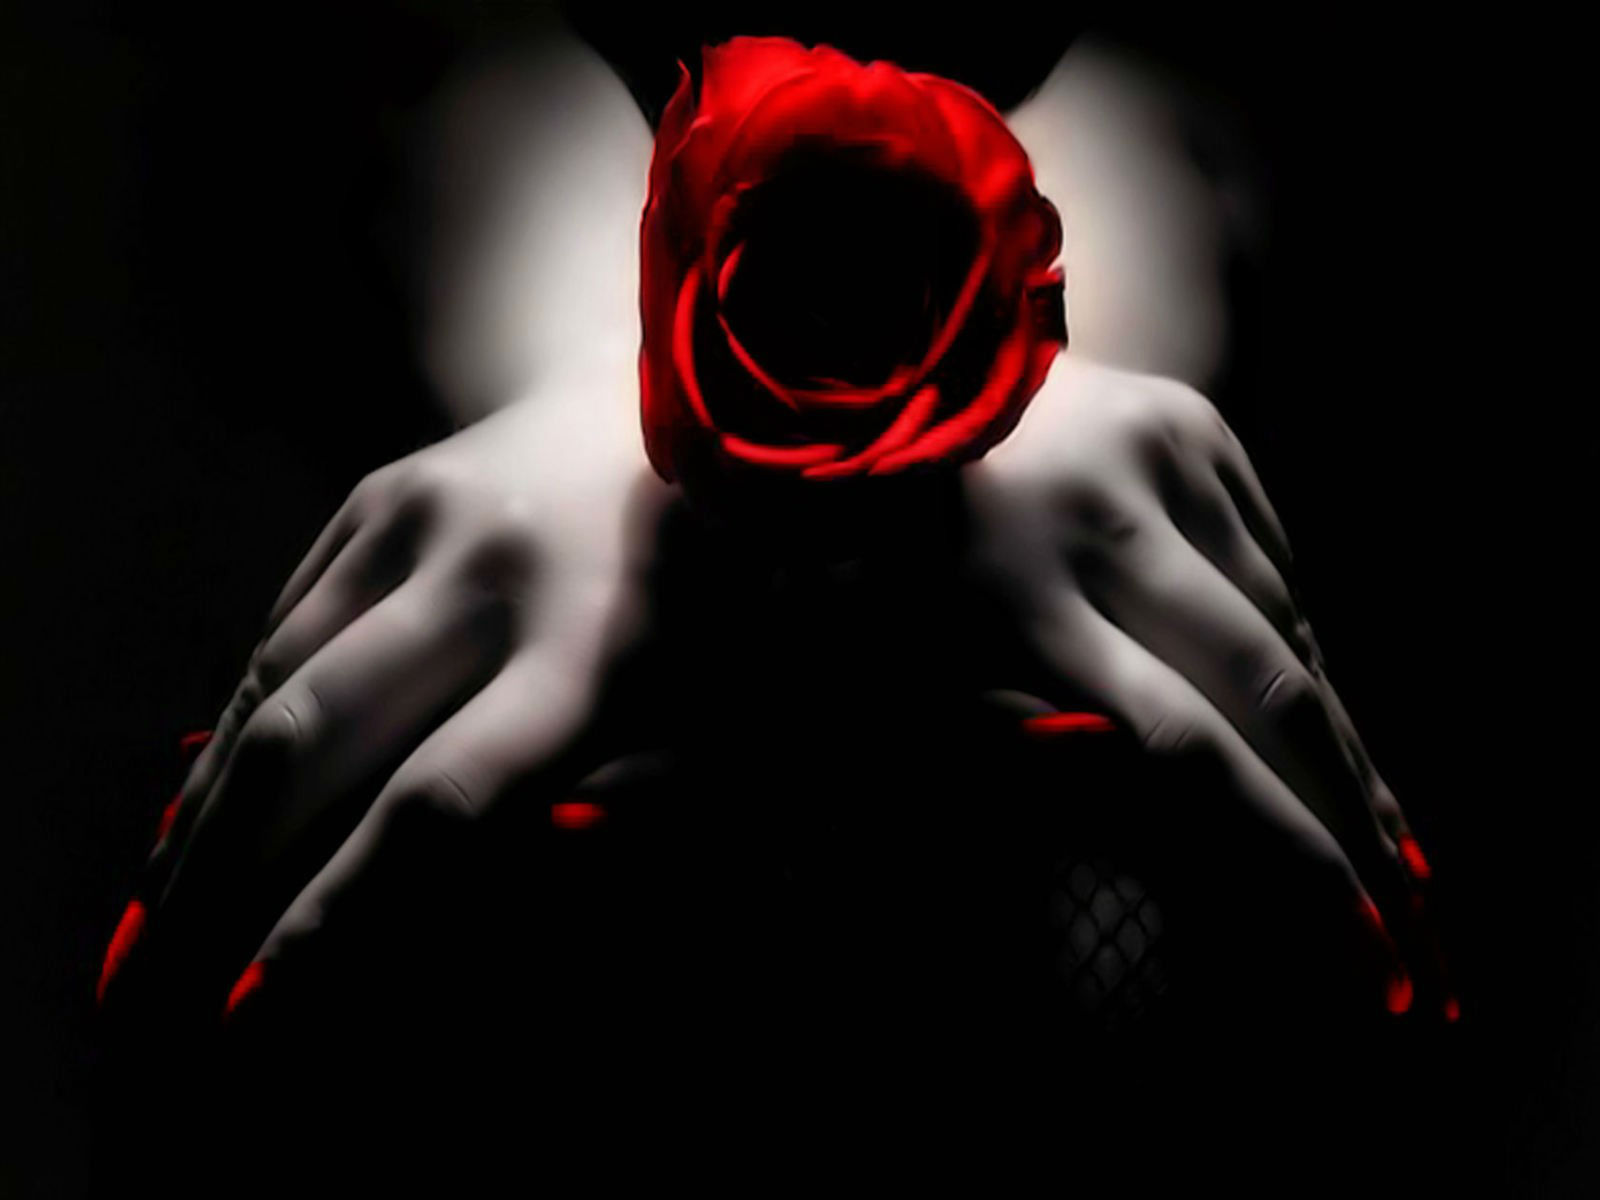 A Girl in a Black Dress with a Red Rose Gothic Style Female Hand with  Black Nails Symbol of Love and Death Stock Photo  Image of loss elegant  191761398